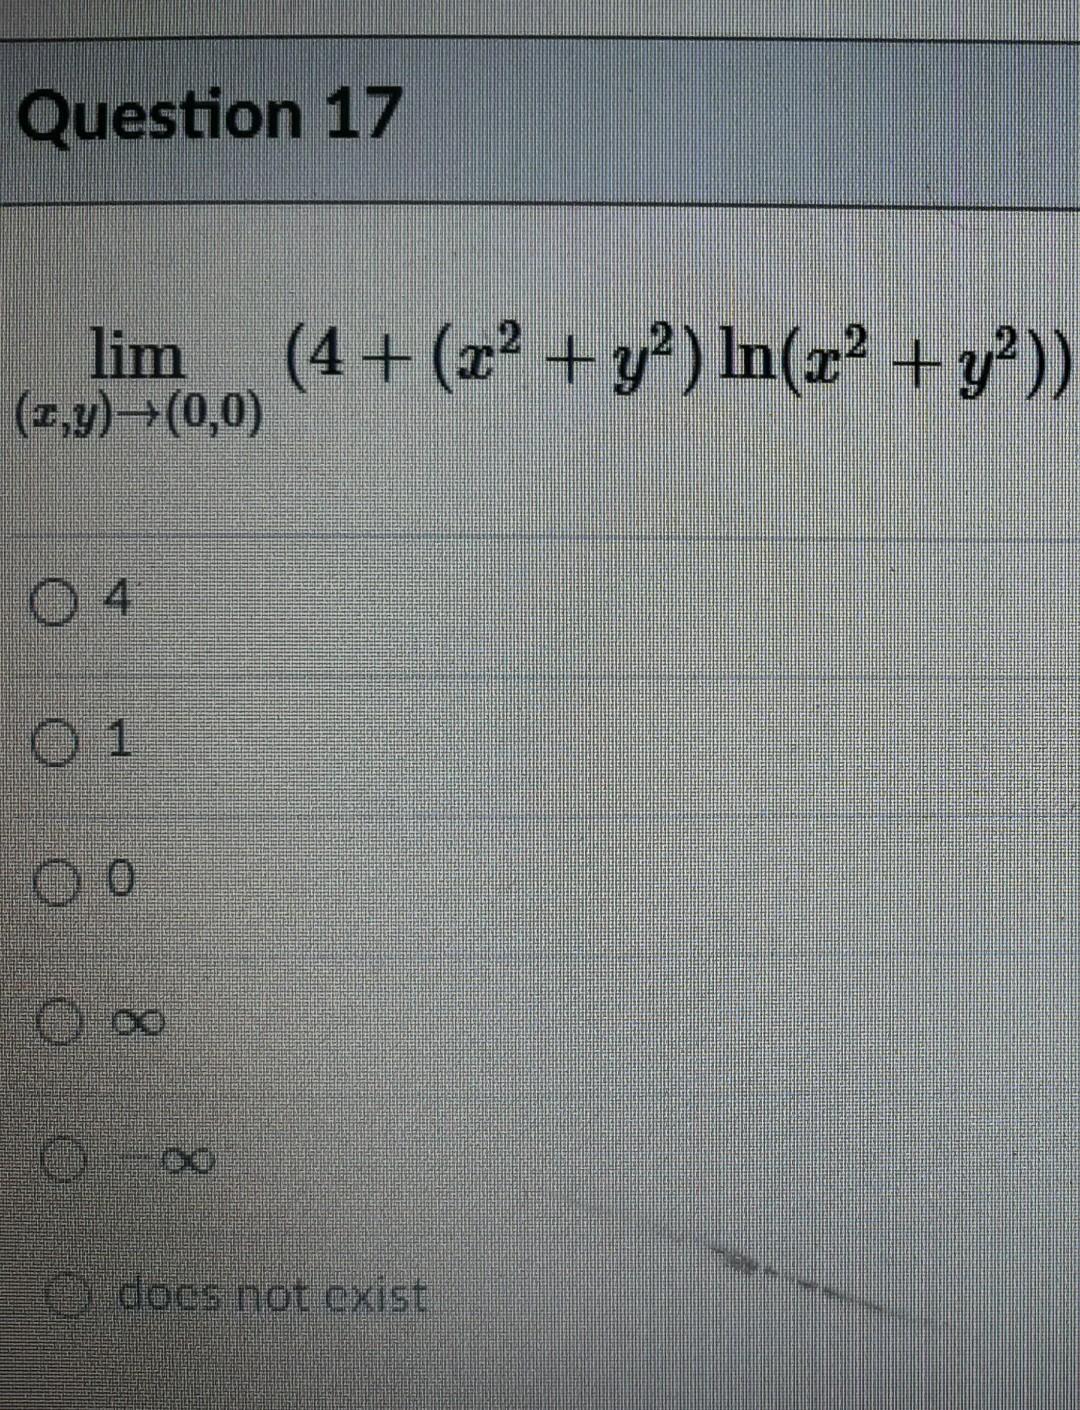 Question 17 Lim 4 X2 Y2 In X2 Y2 2 4 0 0 04 0 1 Oo Ooo Does Not Exist 1